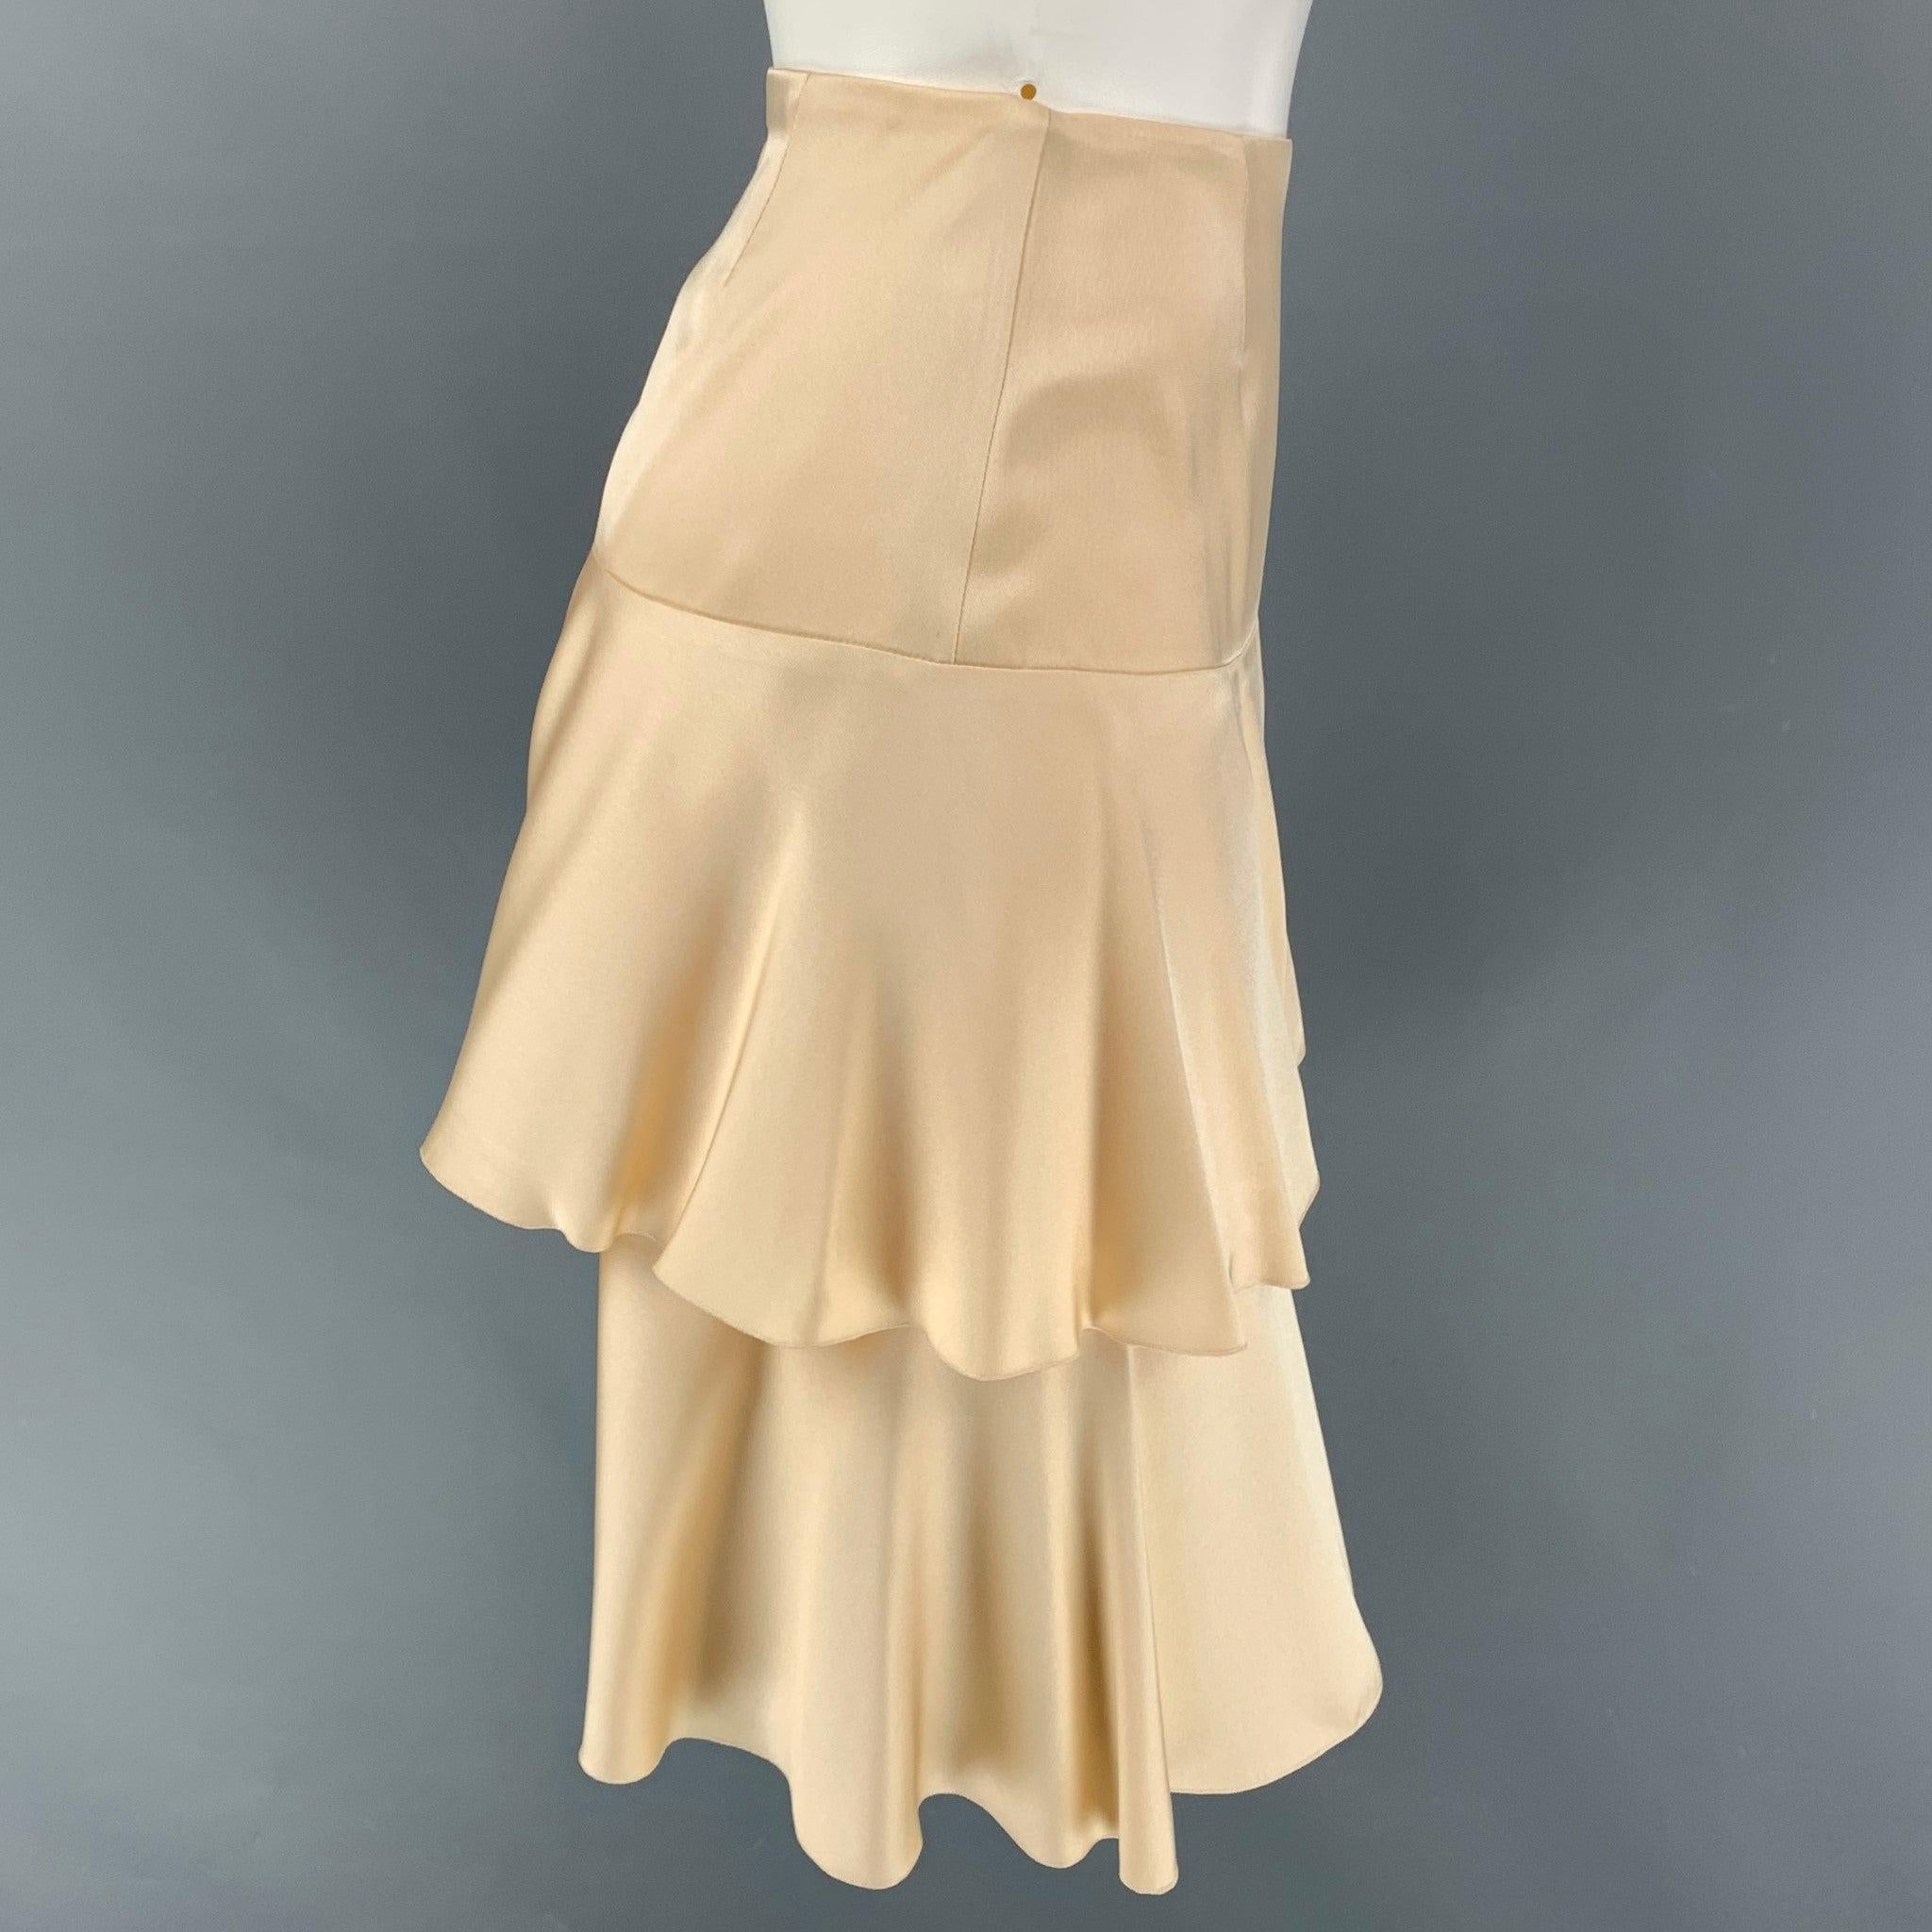 CHANEL AI098 03A Size 4 Champagne Silk Layered Skirt In Good Condition For Sale In San Francisco, CA